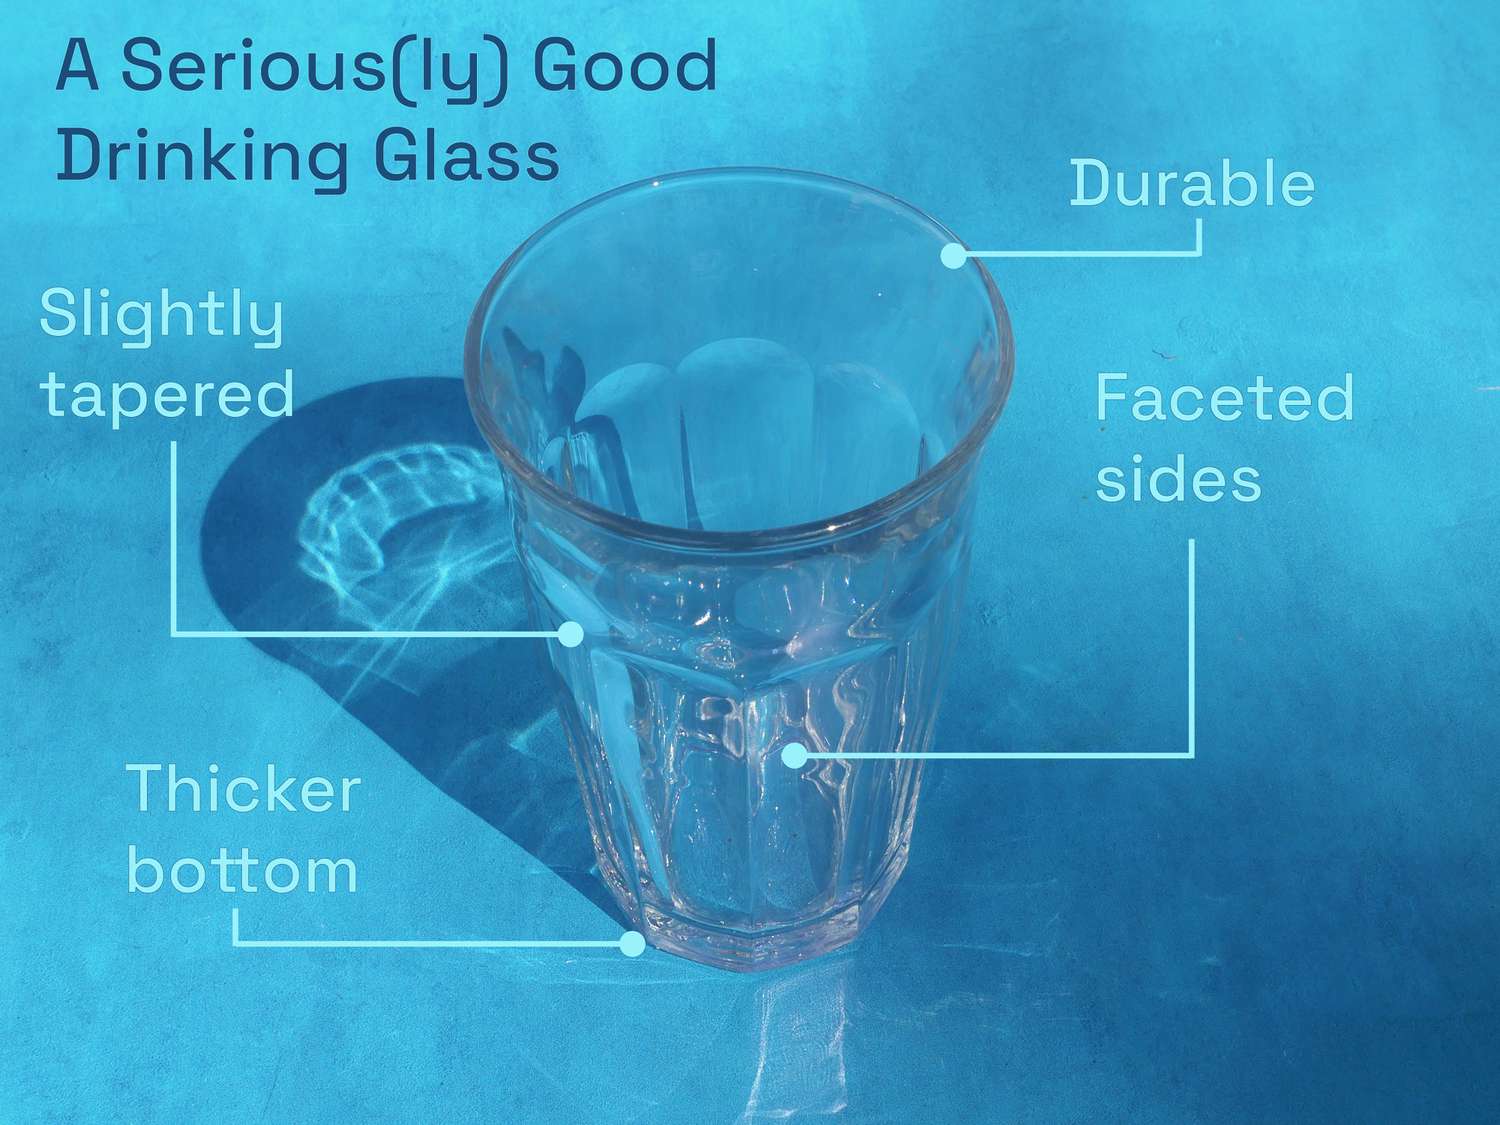 a seriously good drinking glass is slightly tapered, has a thicker bottom, faceted sides, and is durable